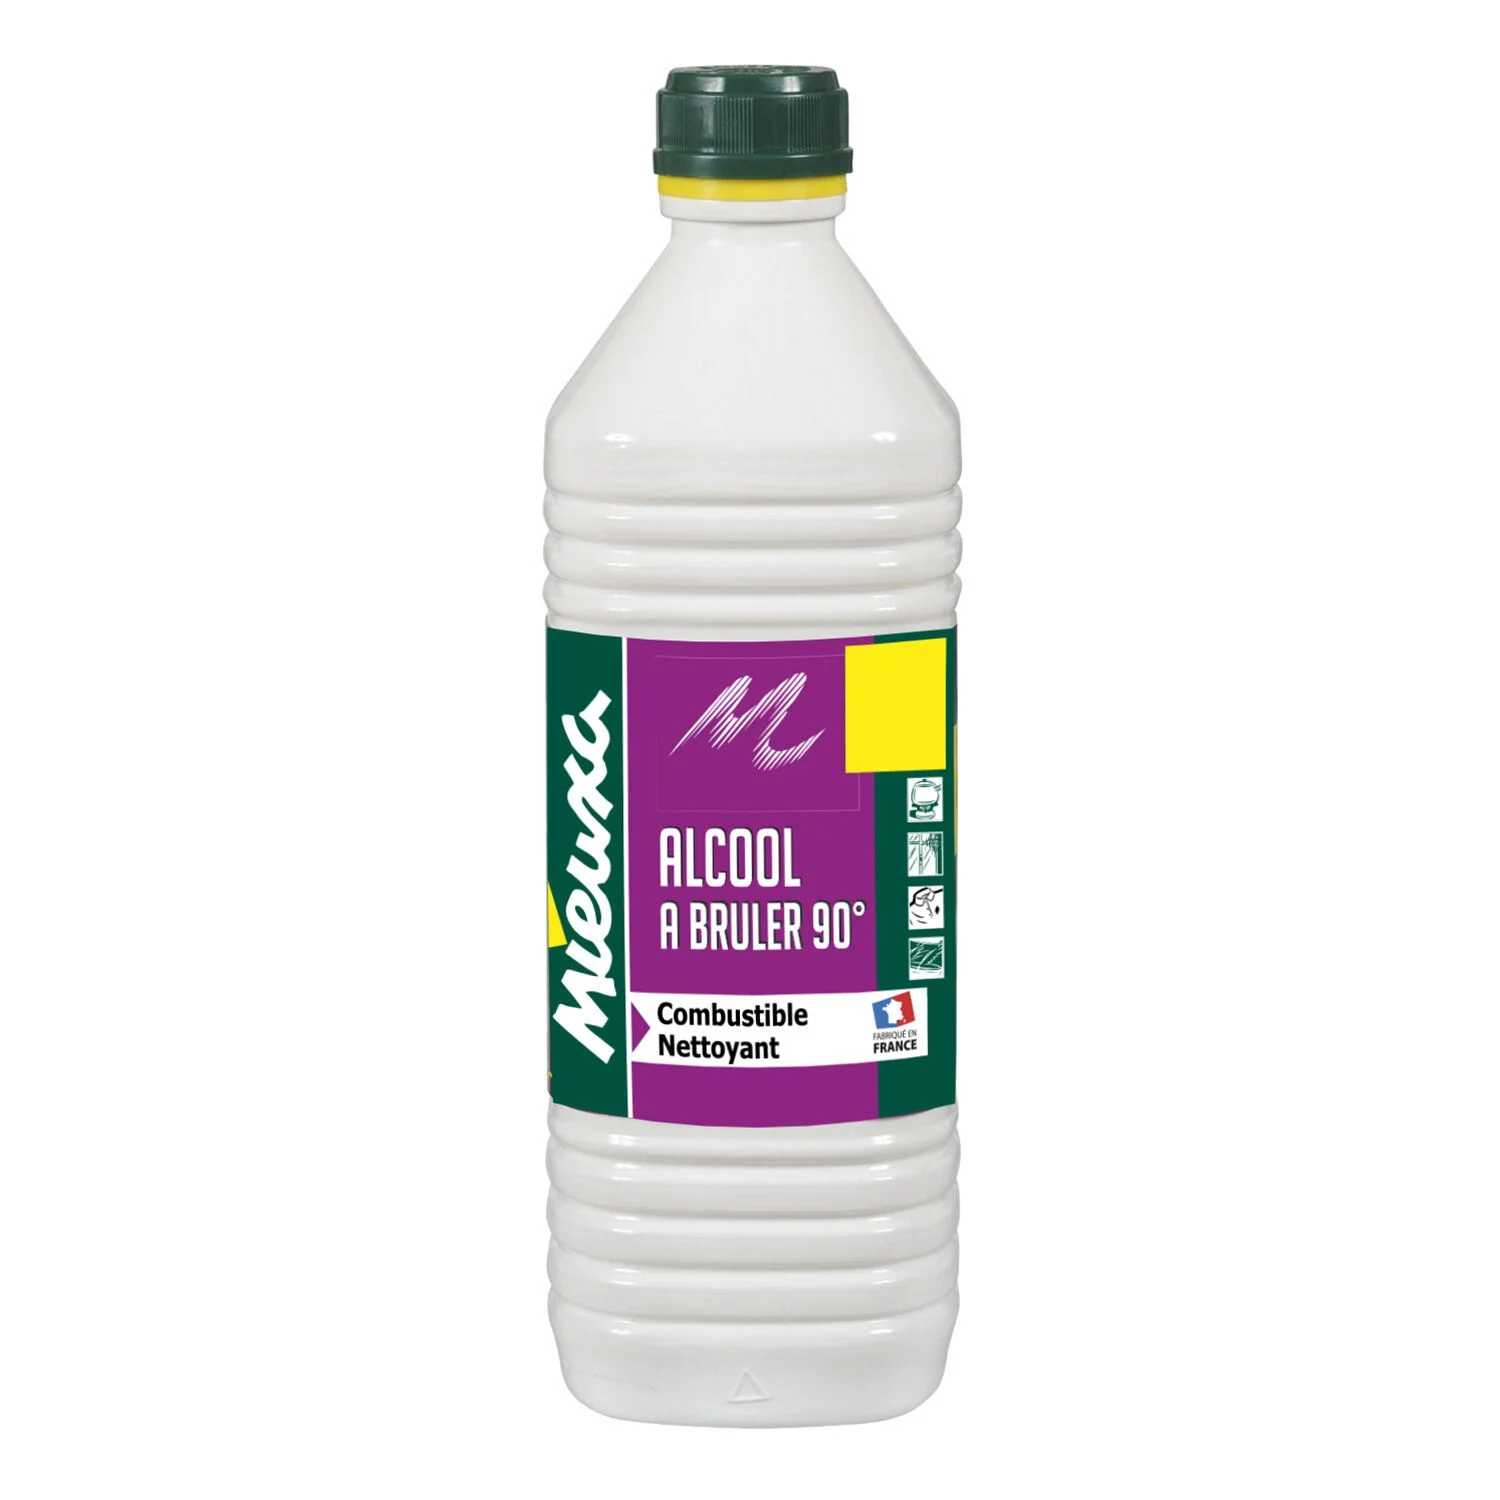 Burning Alcohol 90° Fuel, Cleaner 1 Liter - Mieuxa